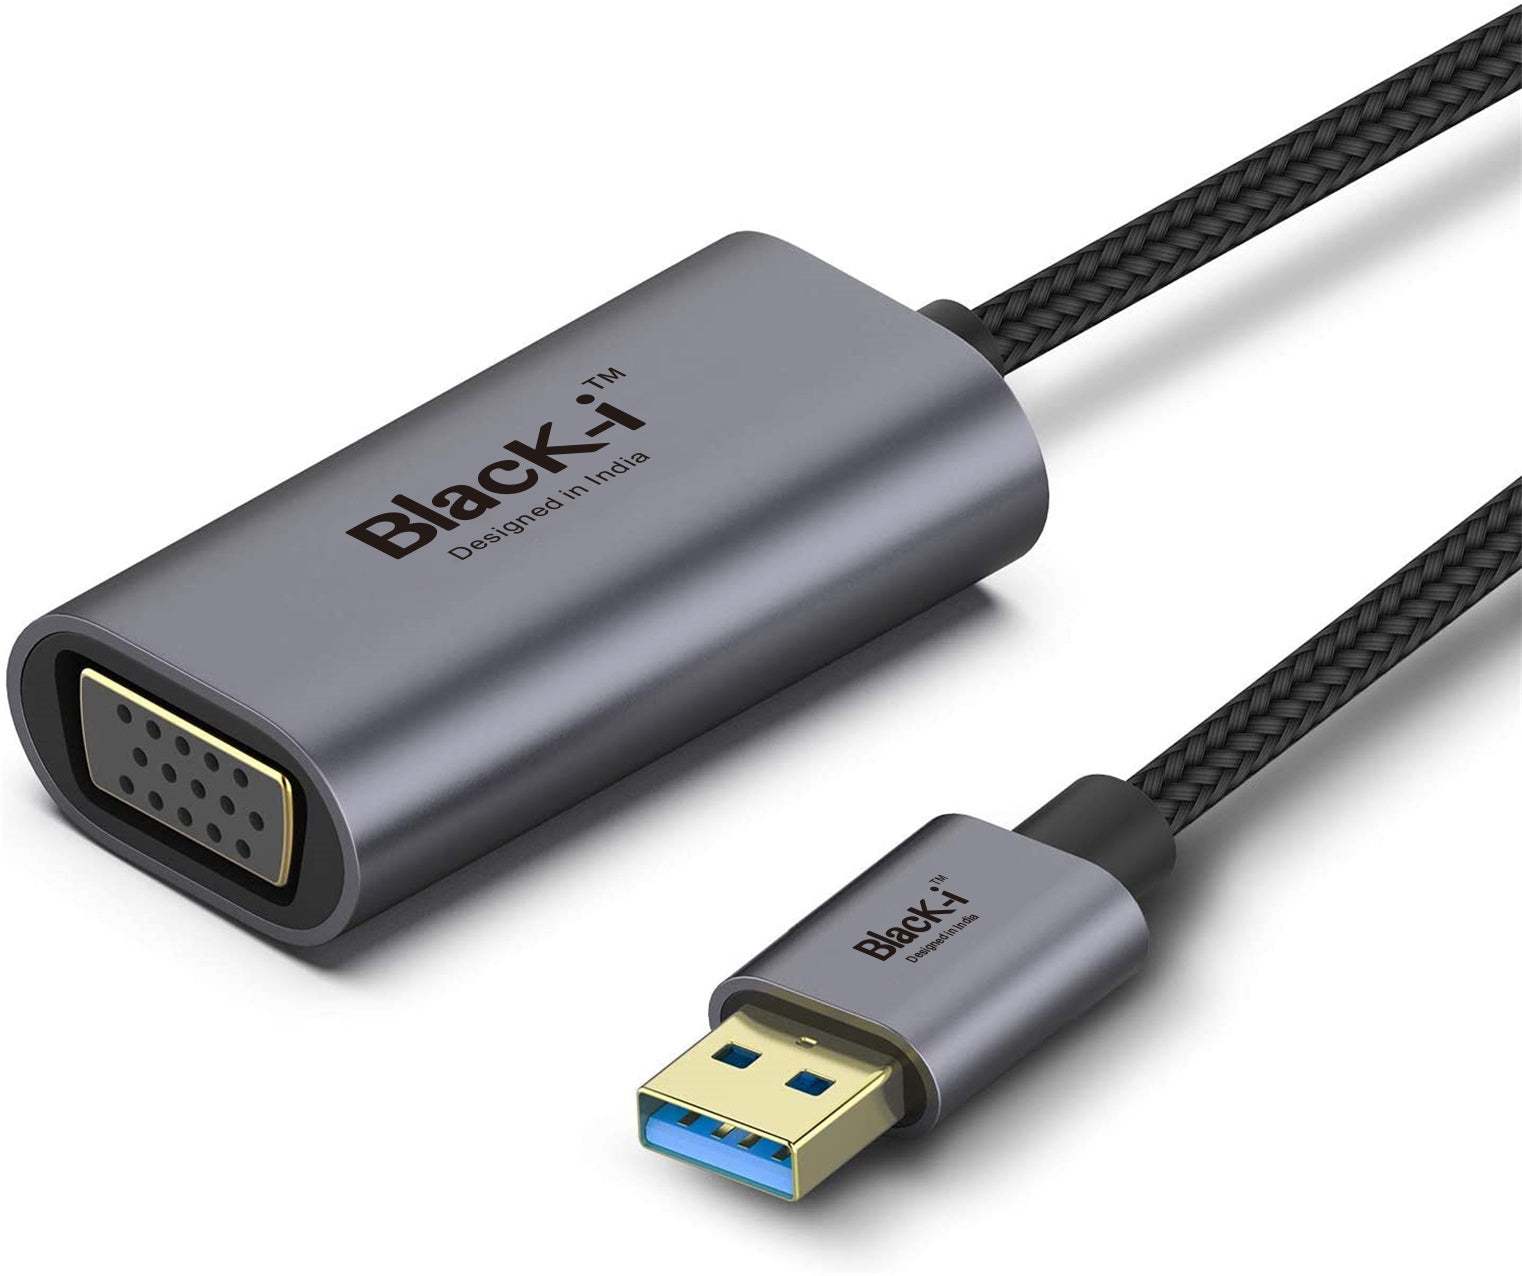 Black-i USB 3.0 to VGA Converter – Effortless Display Expansion for Enhanced Connectivity and Visual Experience